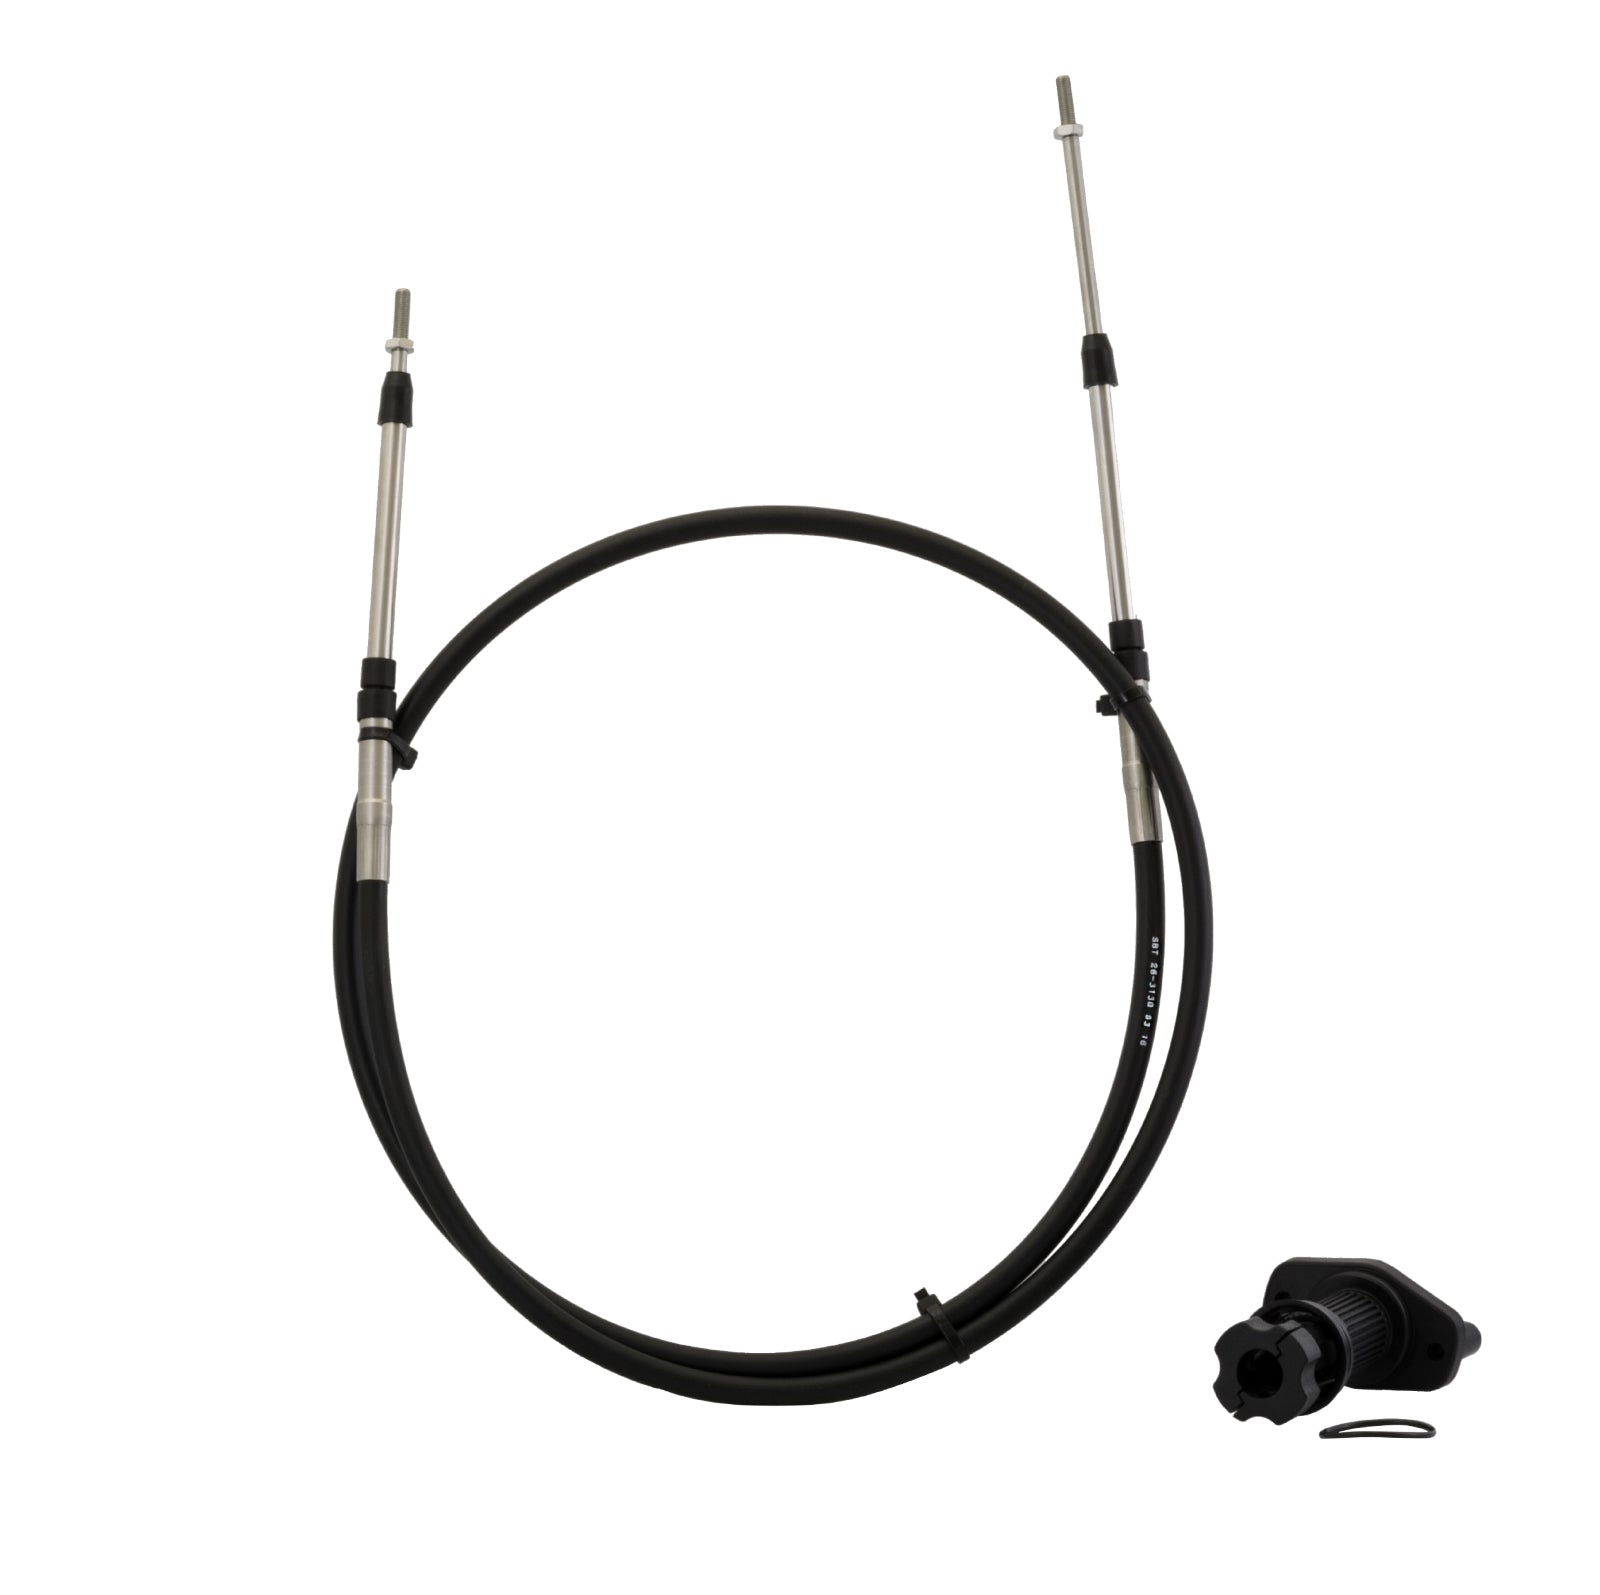 SBT Steering Cable Kit for Sea-Doo Spark